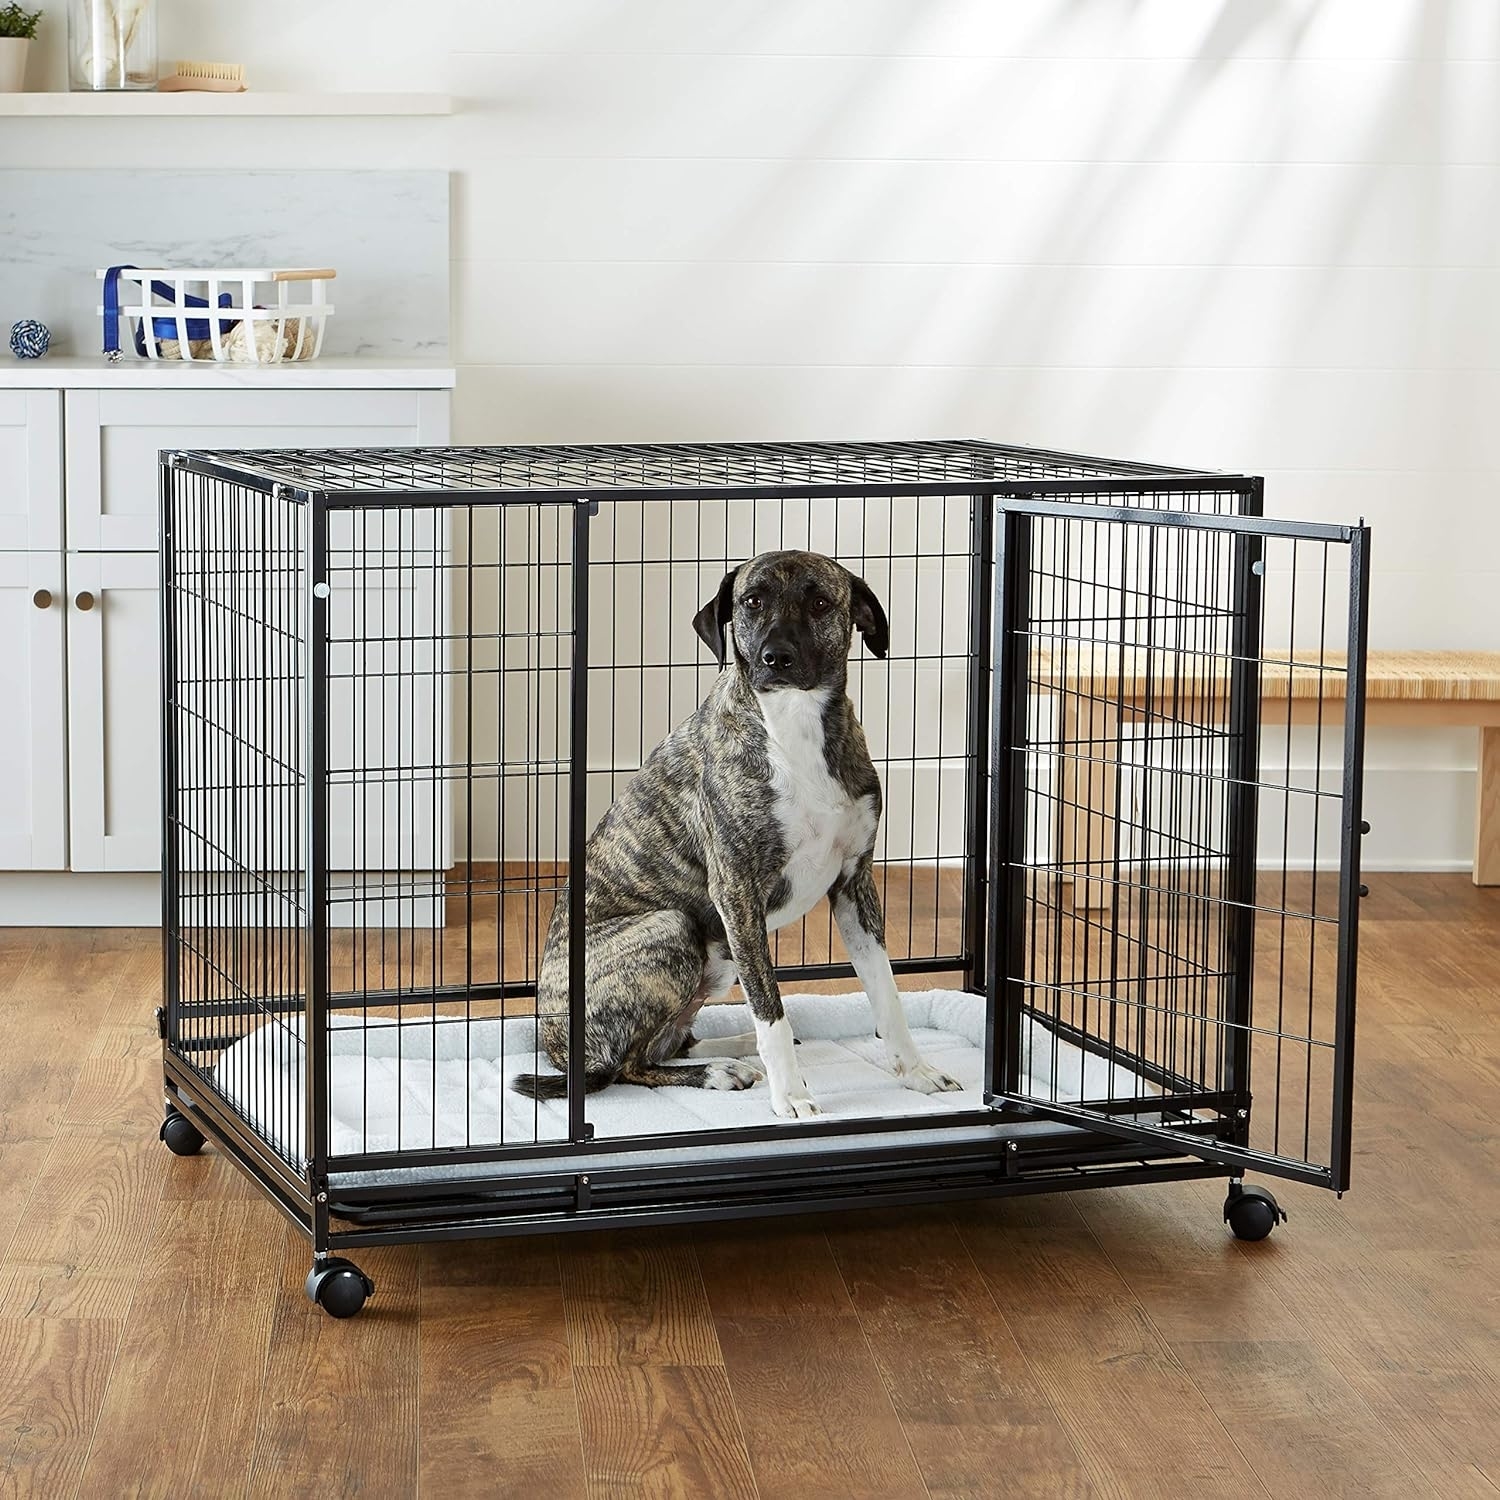 A dog in the large kennel with wheels